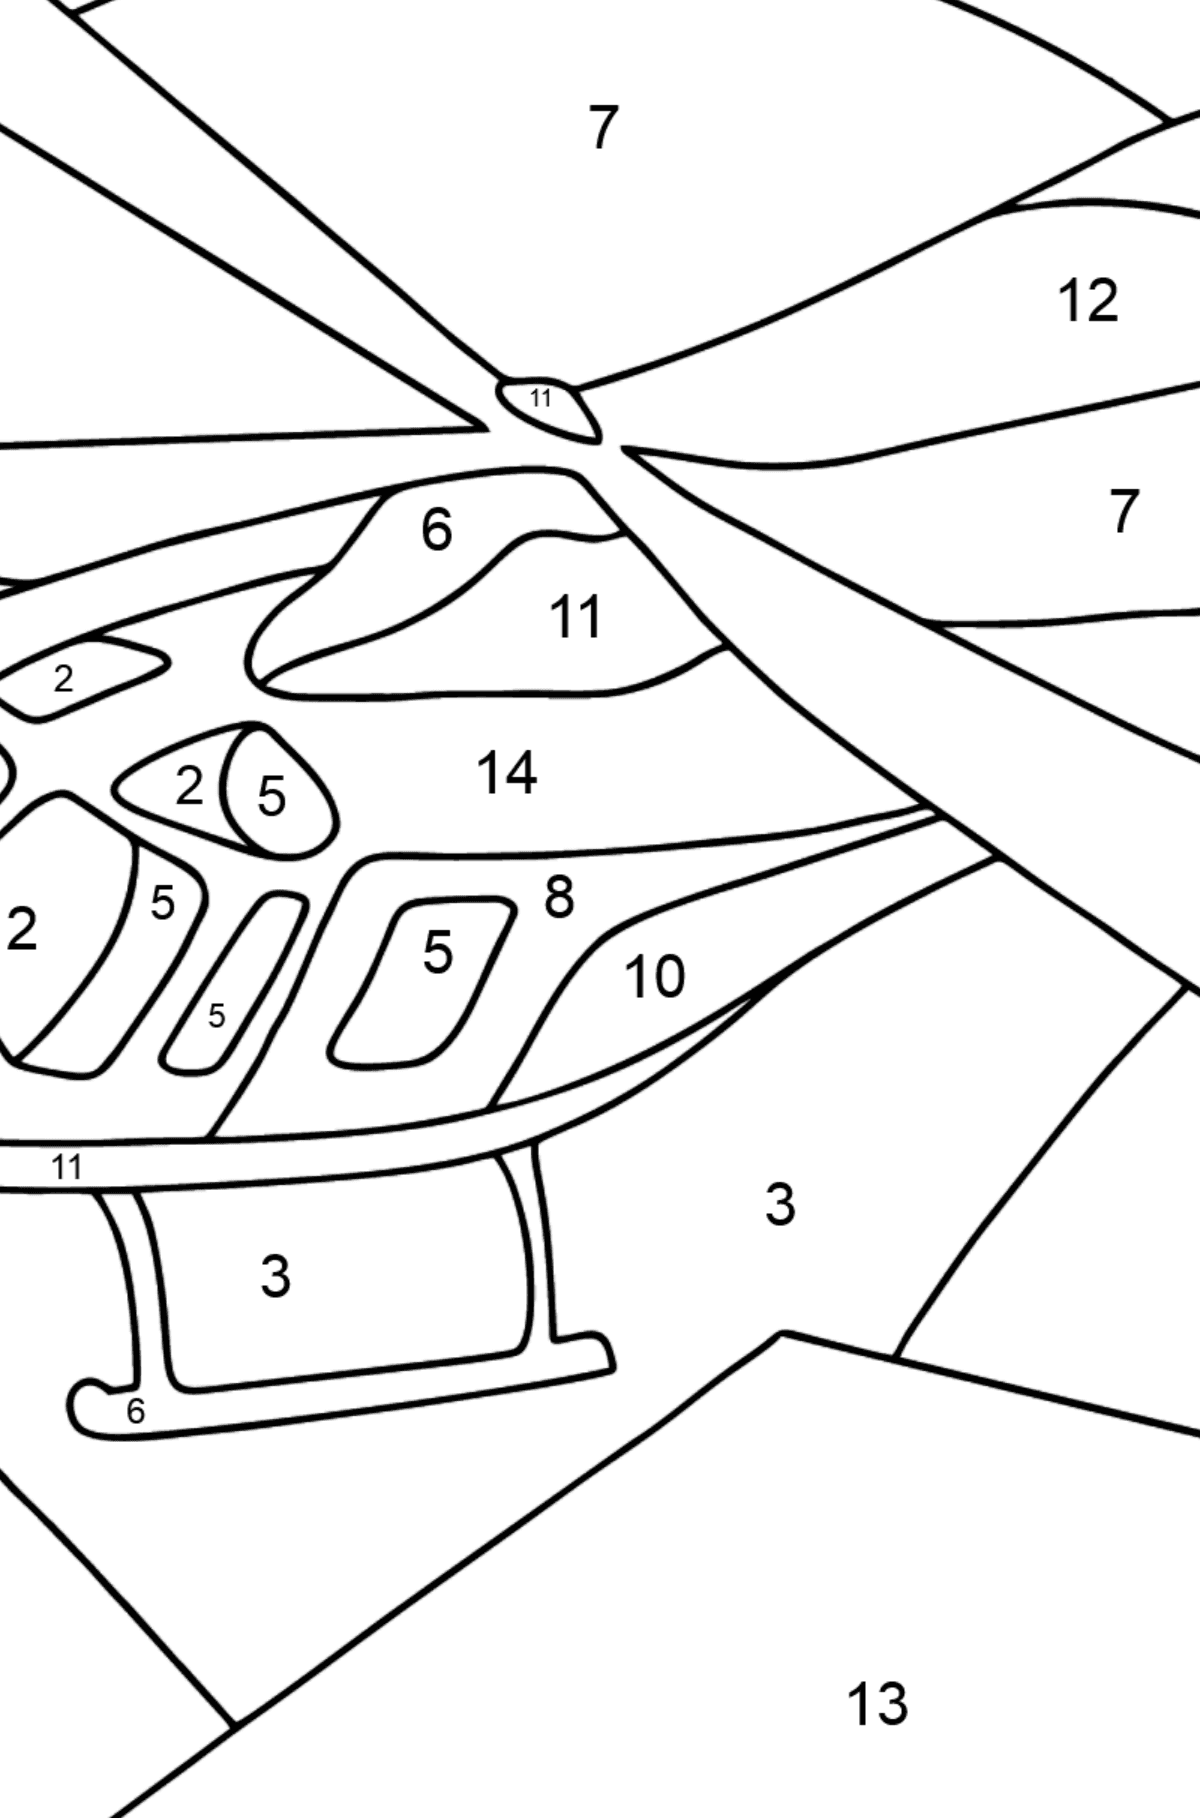 Coloring Page - A Sport Helicopter - Coloring by Numbers for Kids